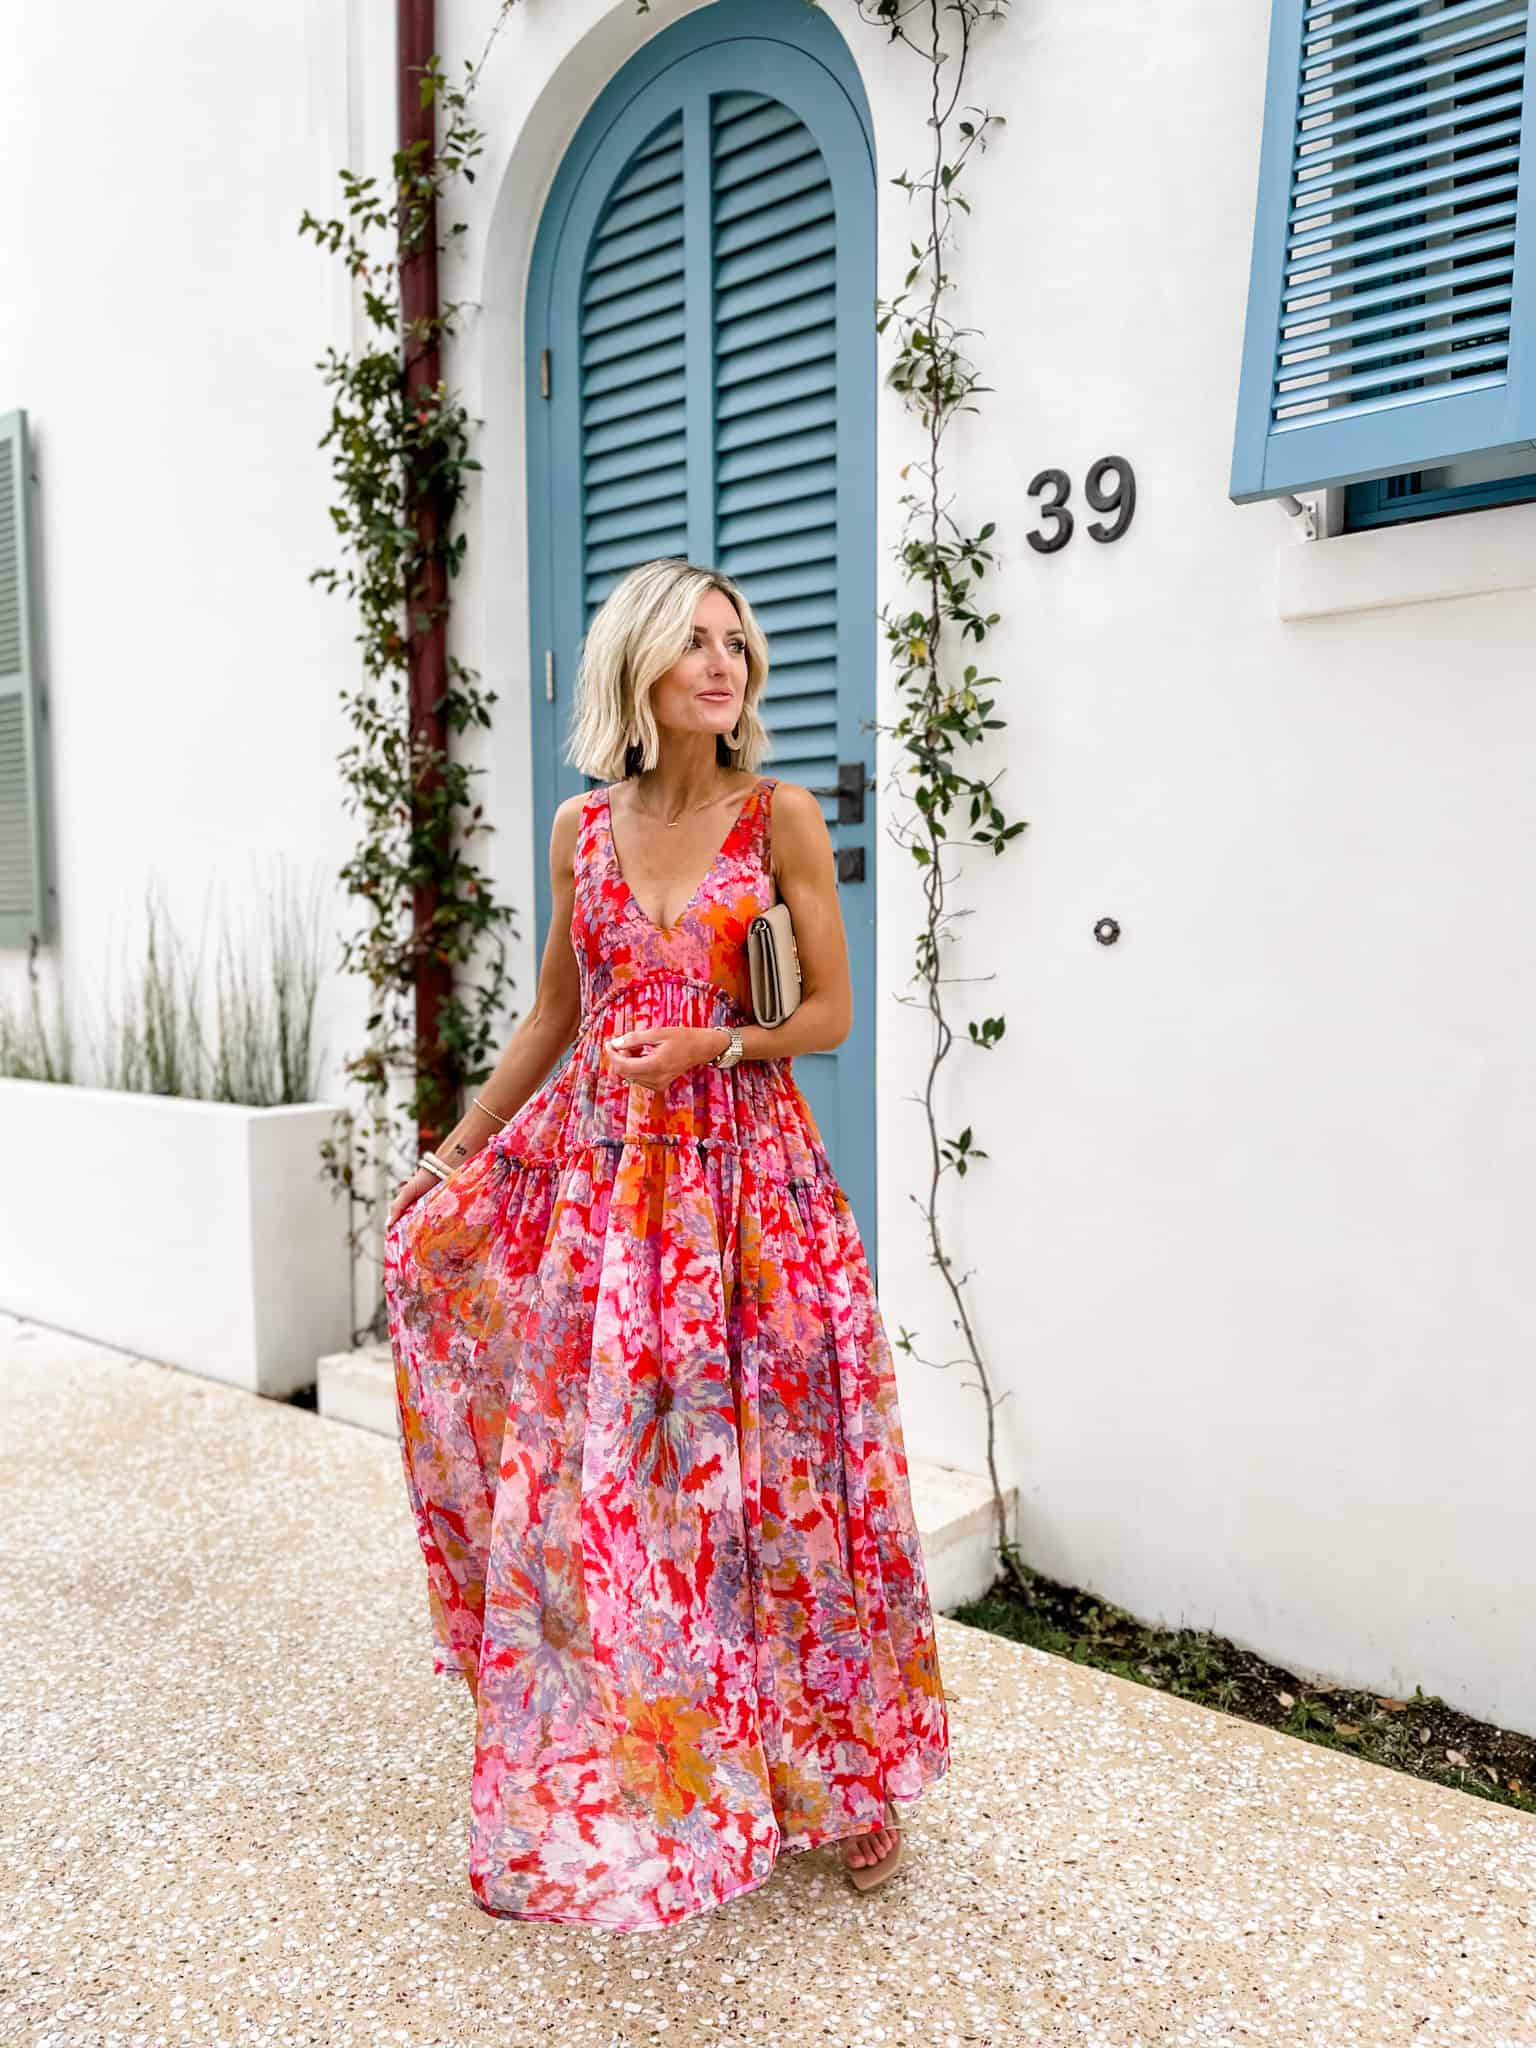 15 Outfit Ideas for Your Next Beach Vacation